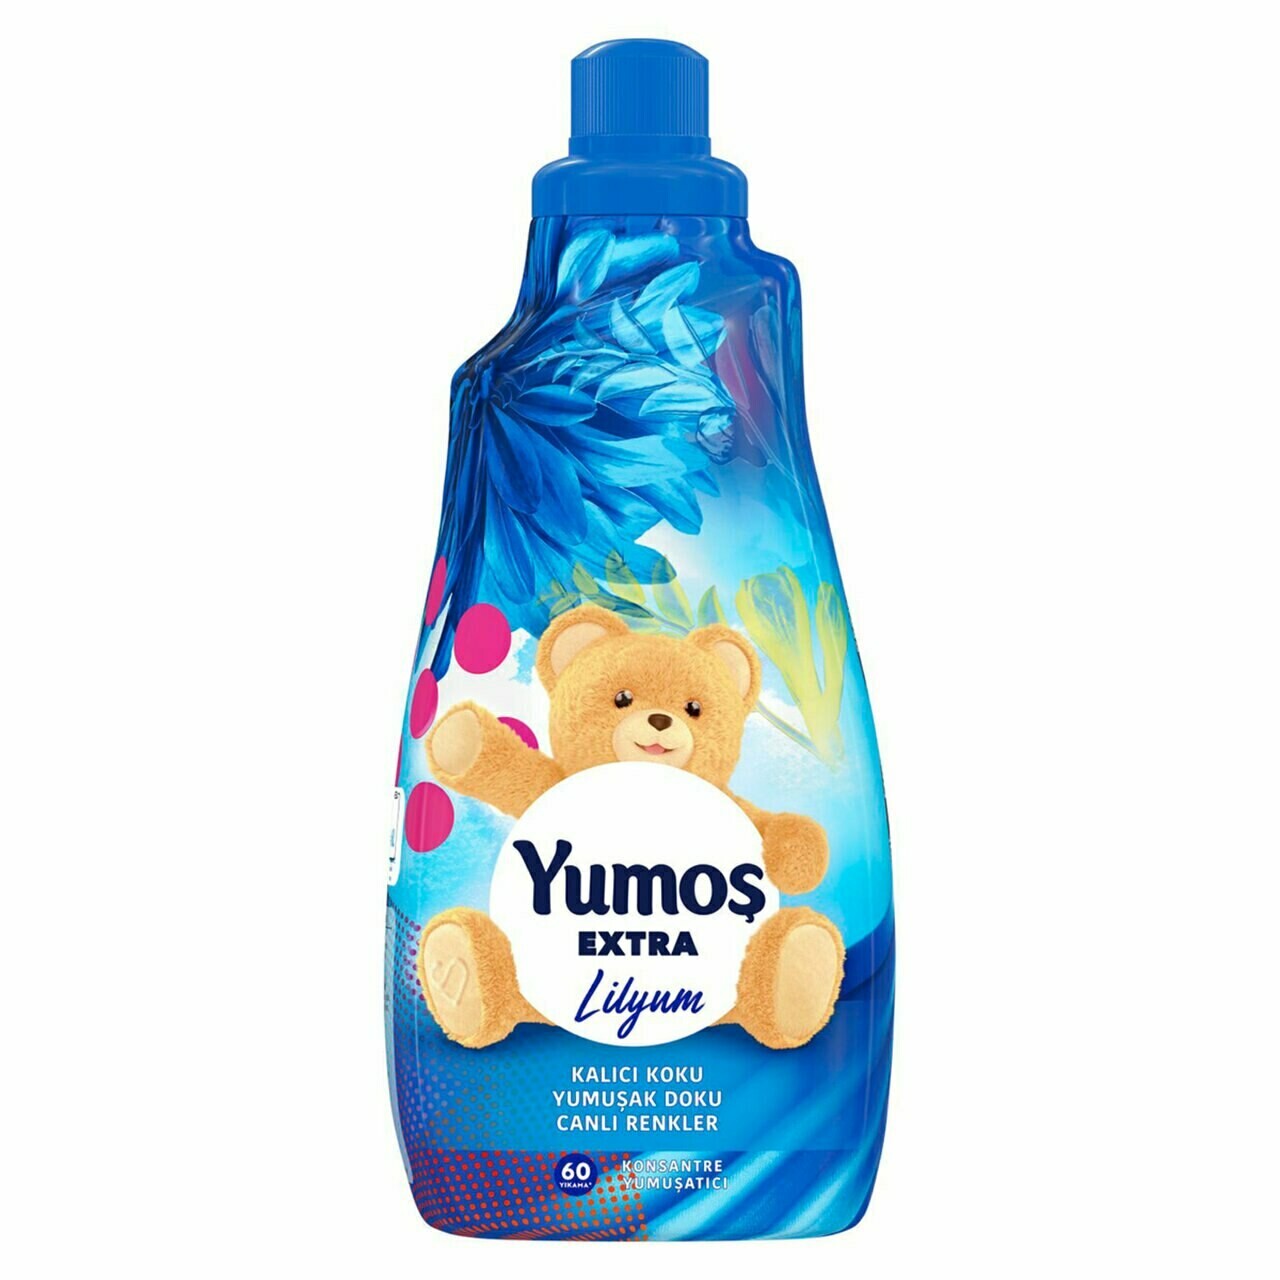 Yumos Laundry Fabric Softener Concentrated Lilyum  1440 ML